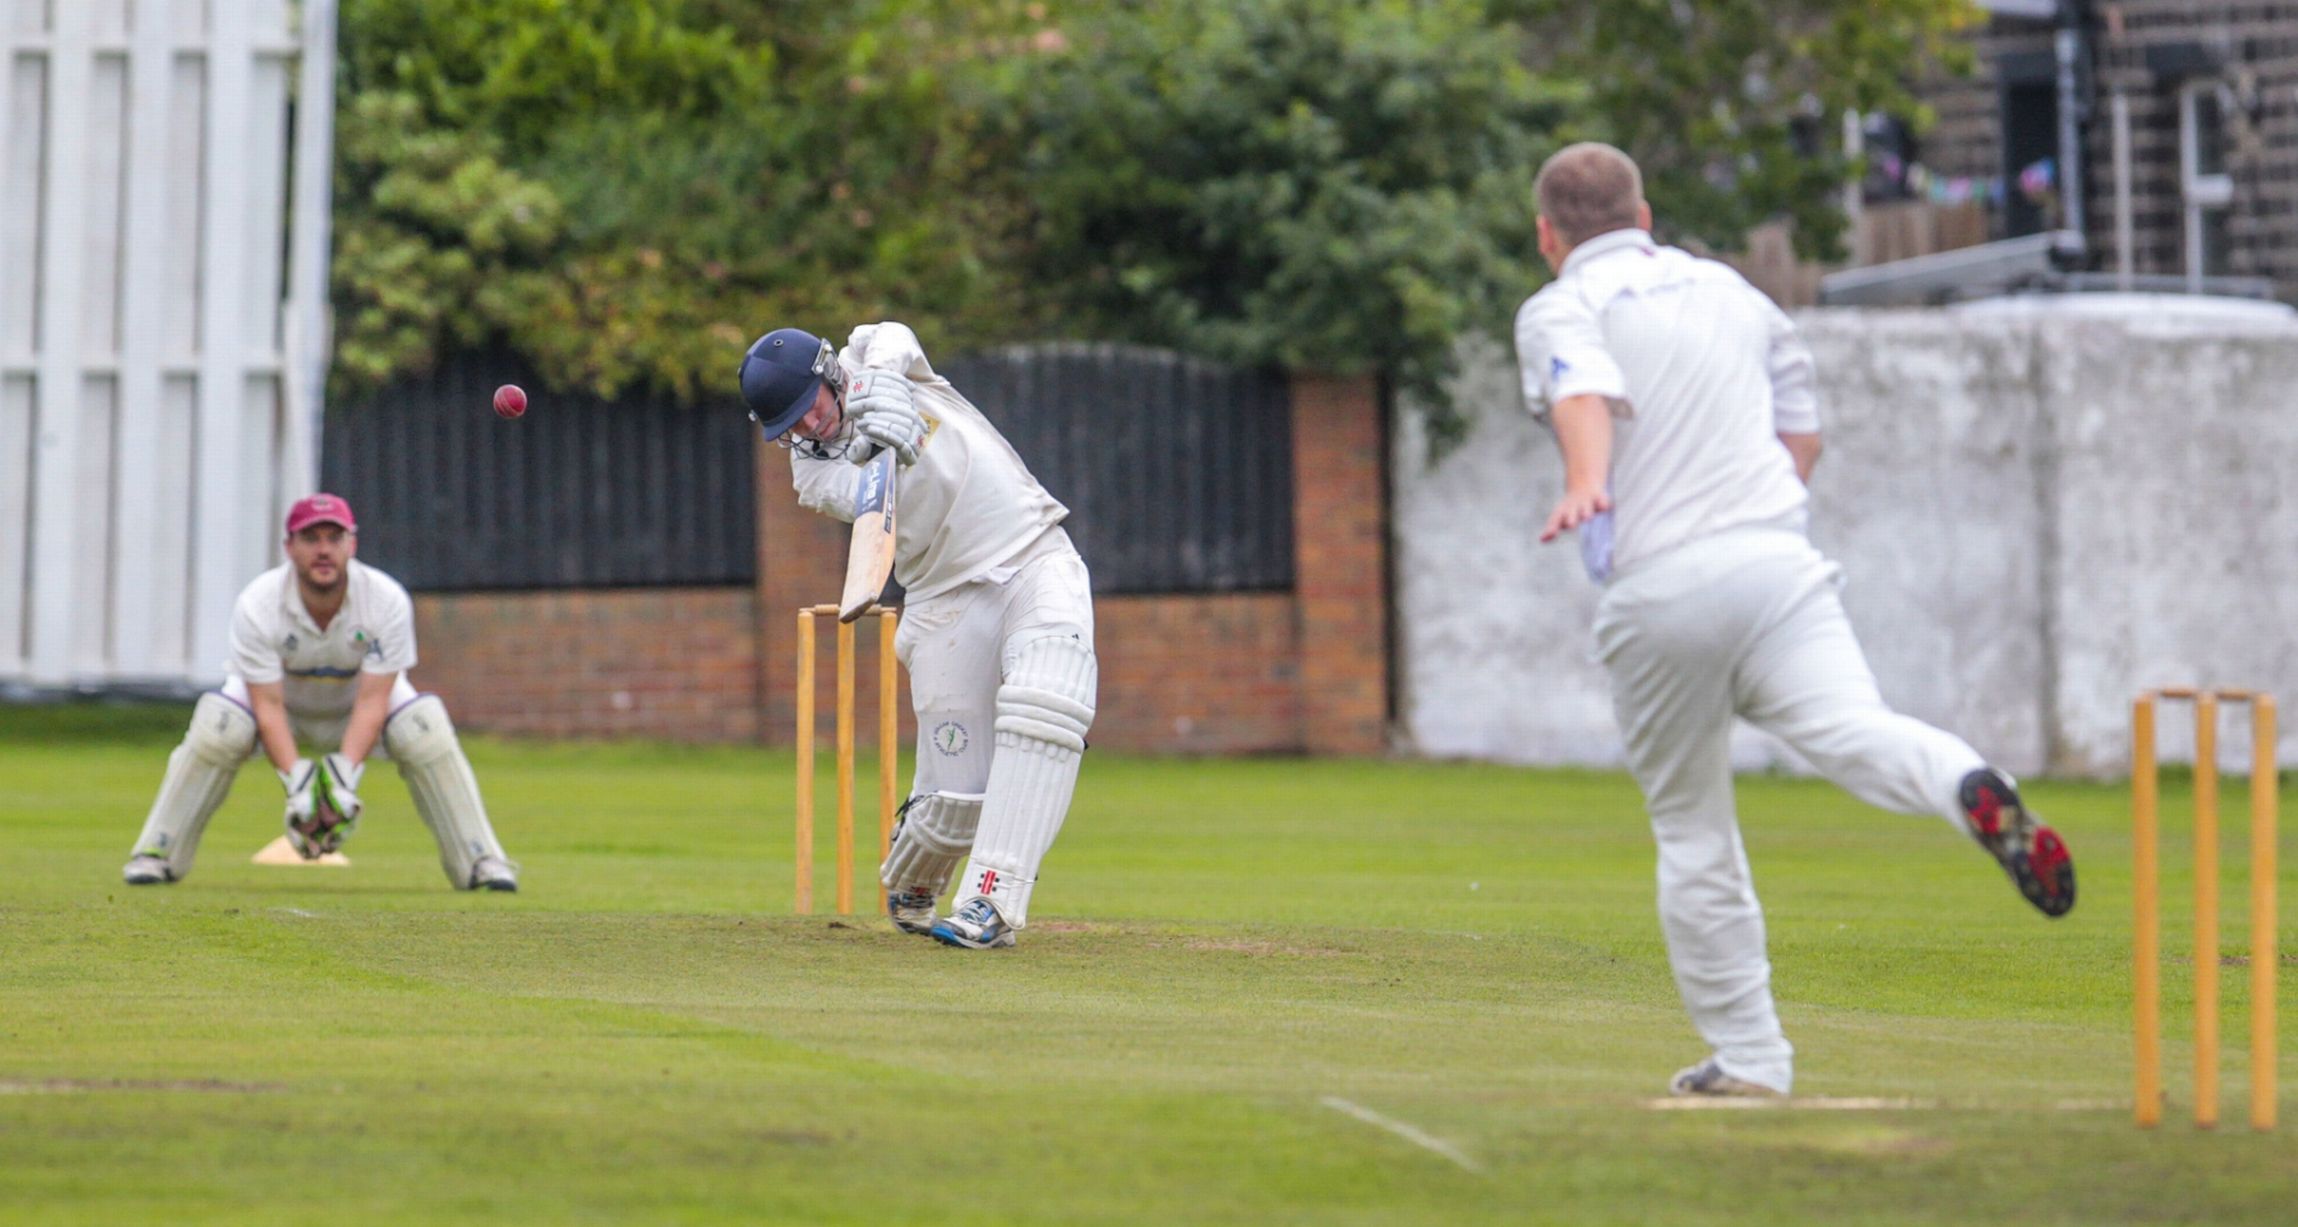 Caufield’s Maiden Ton Helps Oak To Opening Day Win - Championship Two Roundup